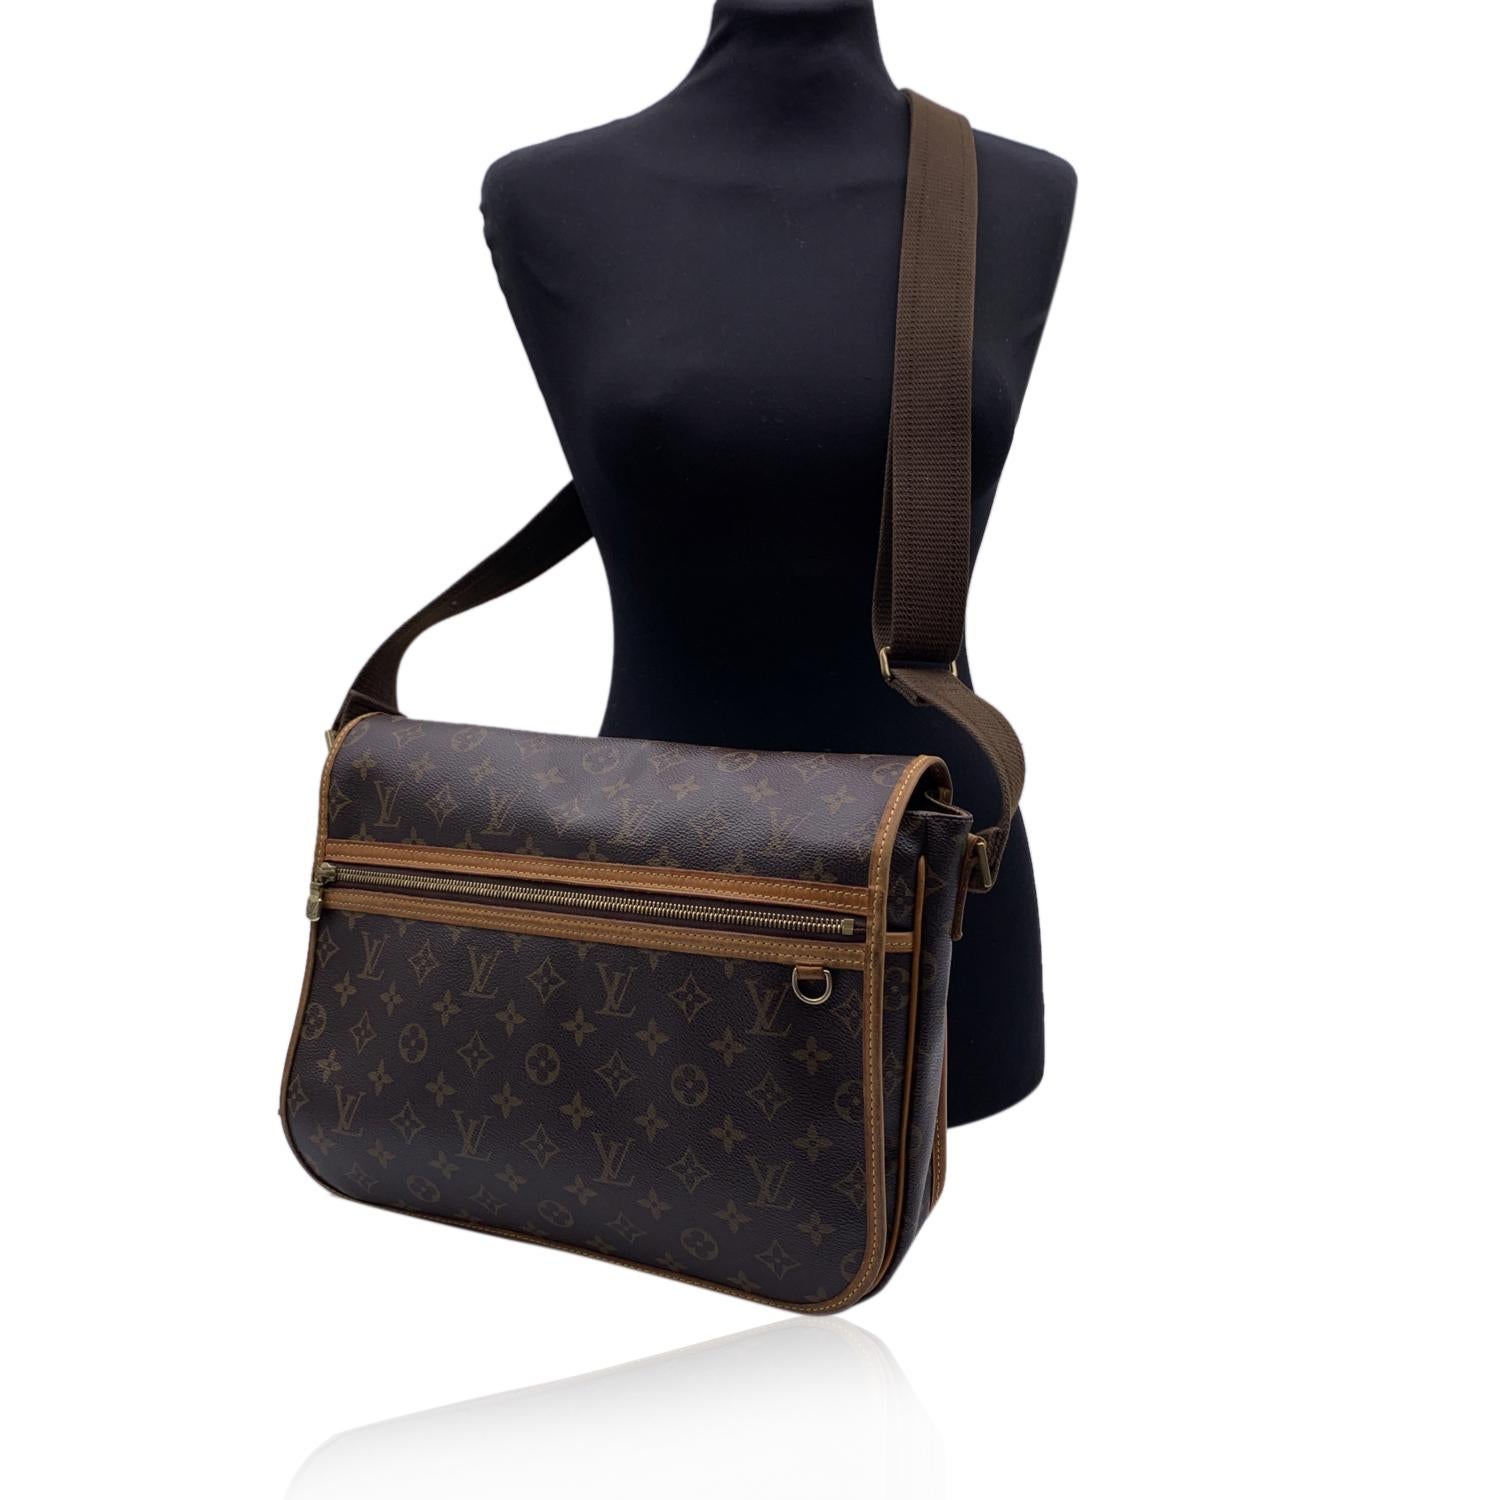 LOUIS VUITTON 'Bosphore MM' crafted in timeless monogram canvas with vacchetta leather trim. Flap with magnetic hidden closure. It features 1 large zip pocket on the front and a D-Ring. Golden brass hardware and adjustable canvas shoulder strap. 1